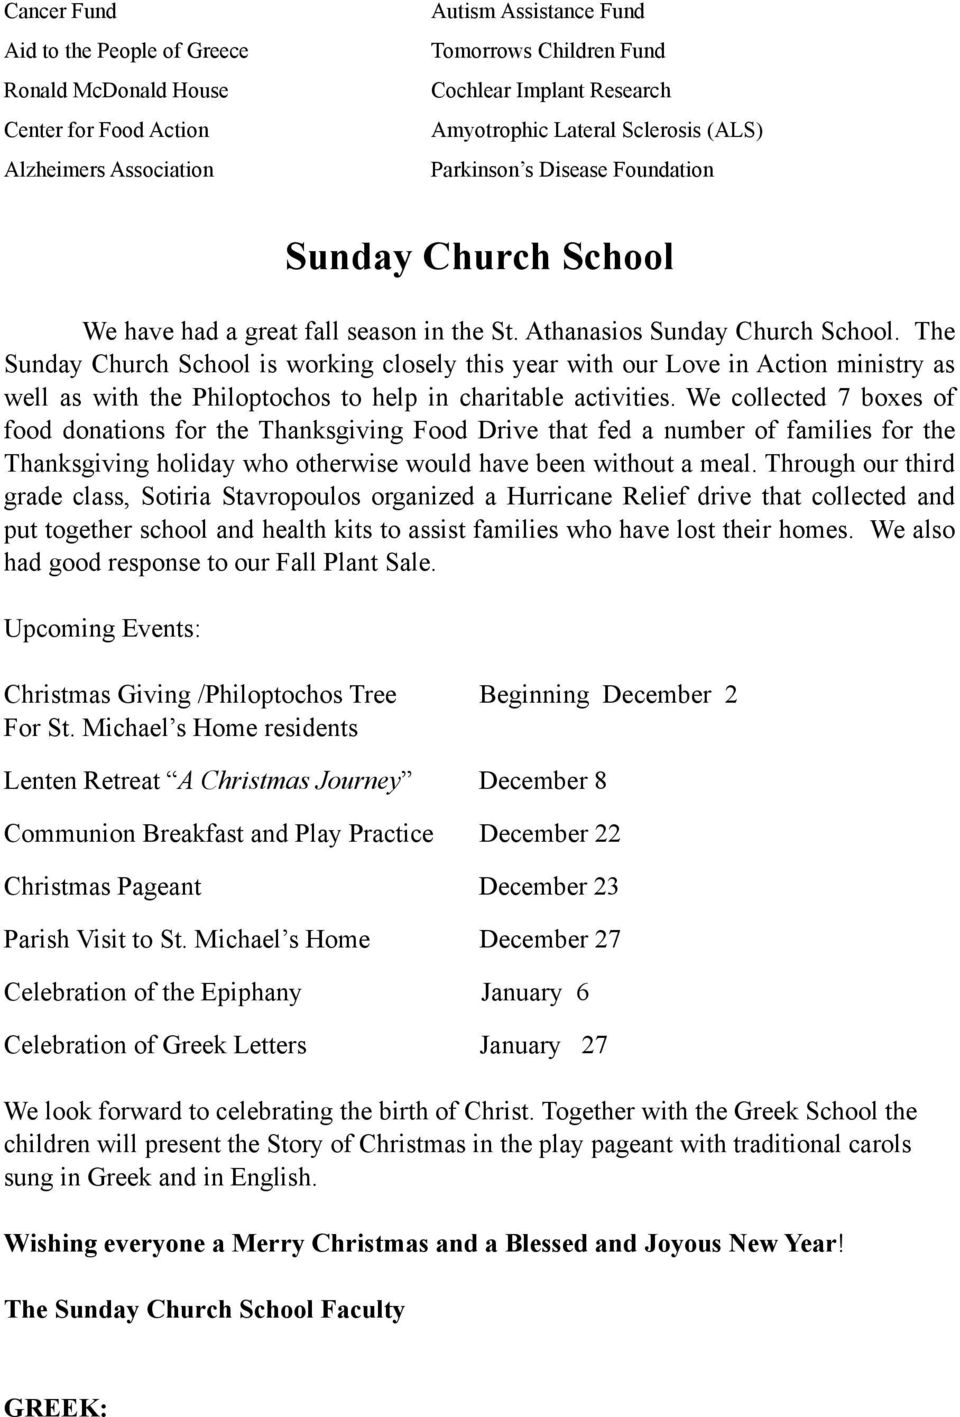 The Sunday Church School is working closely this year with our Love in Action ministry as well as with the Philoptochos to help in charitable activities.